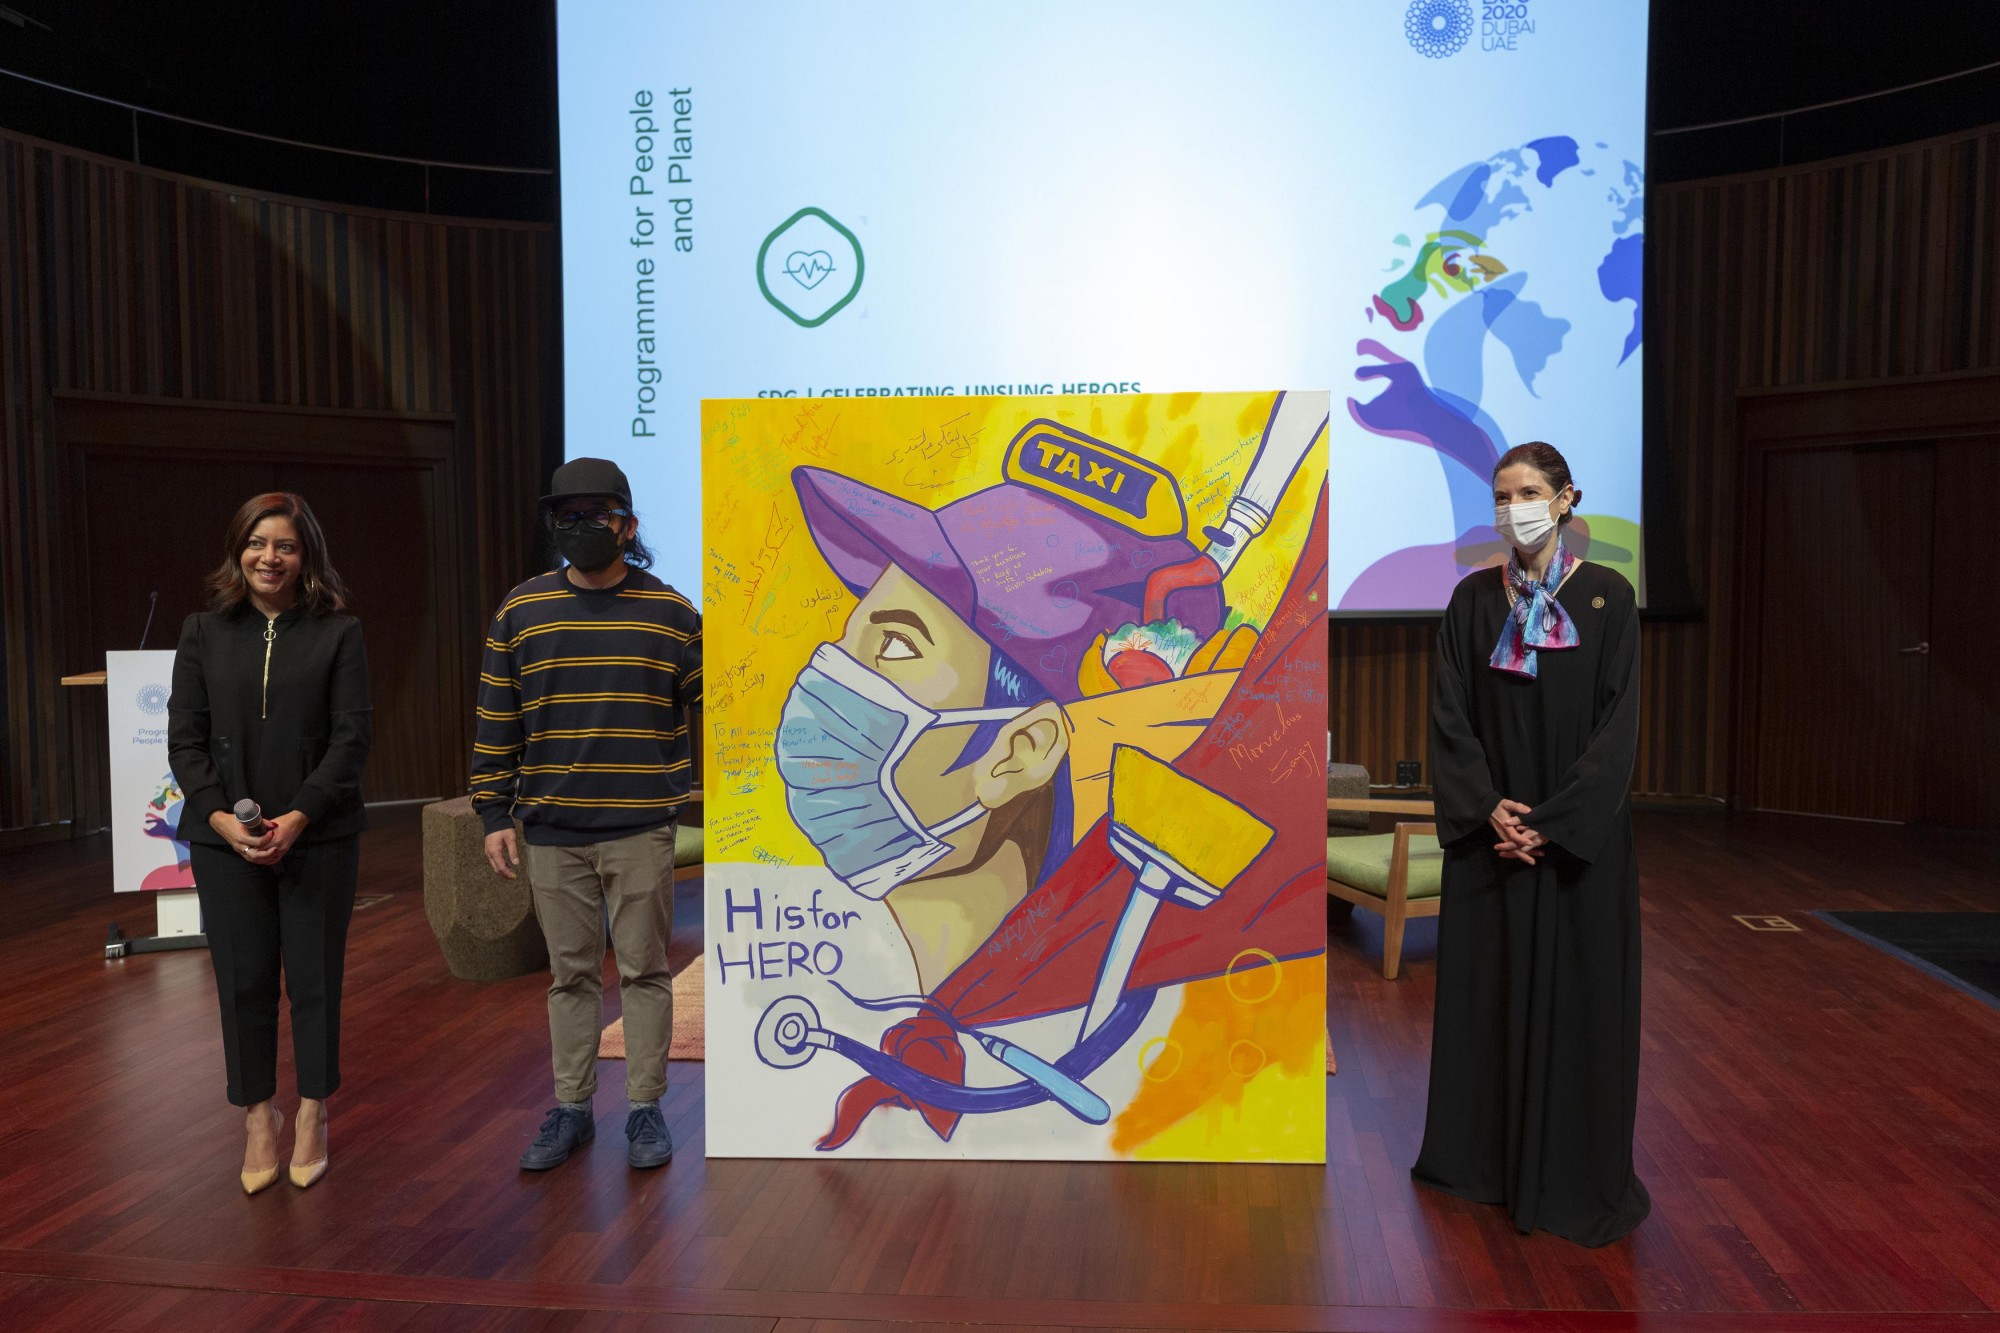 Dr Maha Barakat (R), Director General of the Frontline Heroes Office and Cholo Juan (C), Filipino Visual artist during Celebrating the Unsung Heroes at Terra the Auditorium m39240